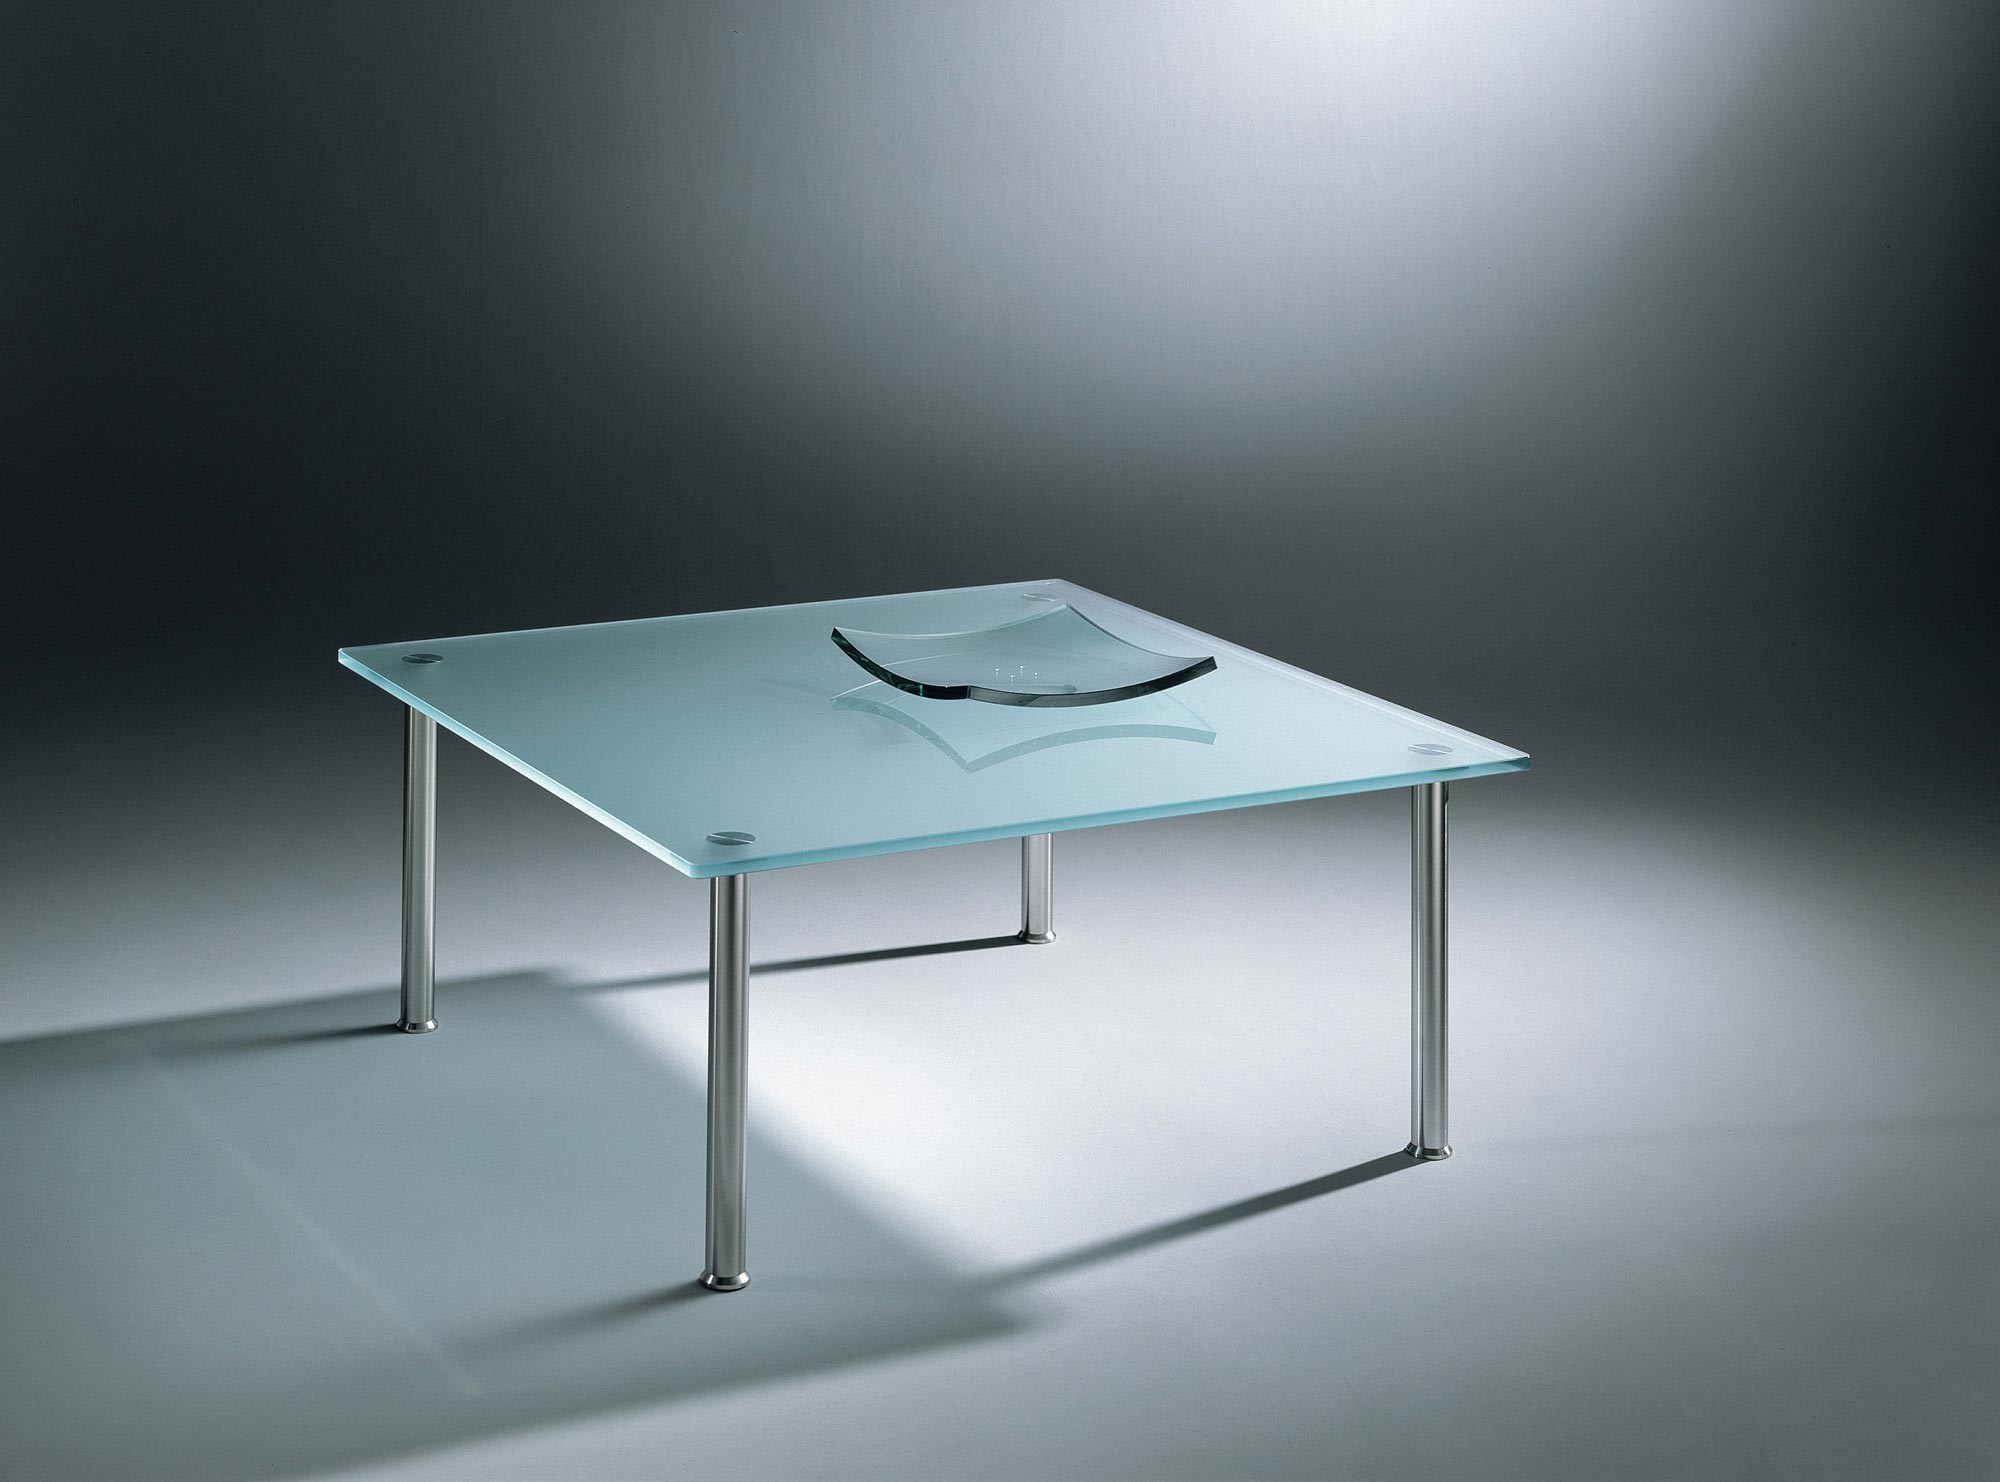 Glass cocktail table SIRIUS by DREIECK DESIGN: S 9940 - FLOATGLASS satinated - rounded corners - table feet stainless steel brushed